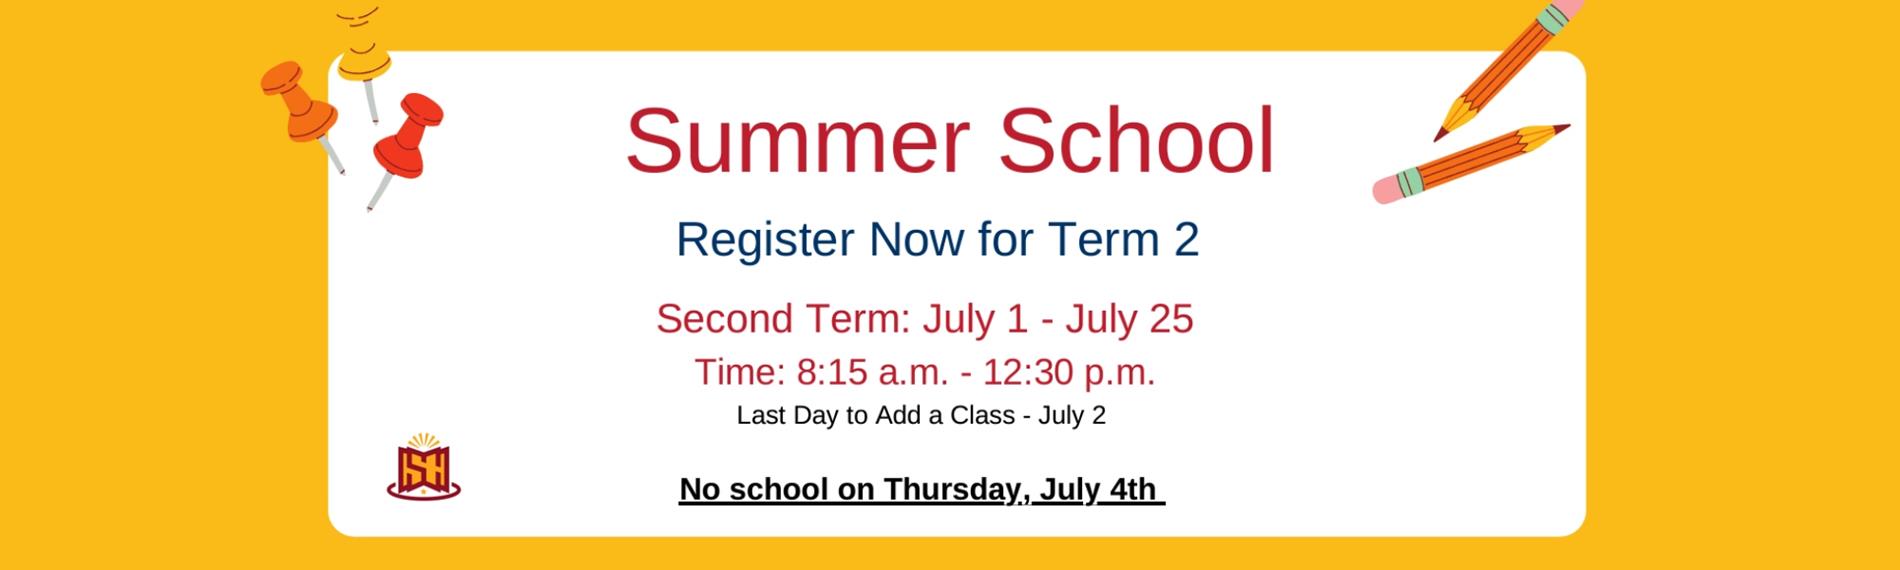 Summer School Register Now for Term 2 July 1-July 25 8:15-12:30 PM  Last day to add a class is July 2nd. No school on July 4th.